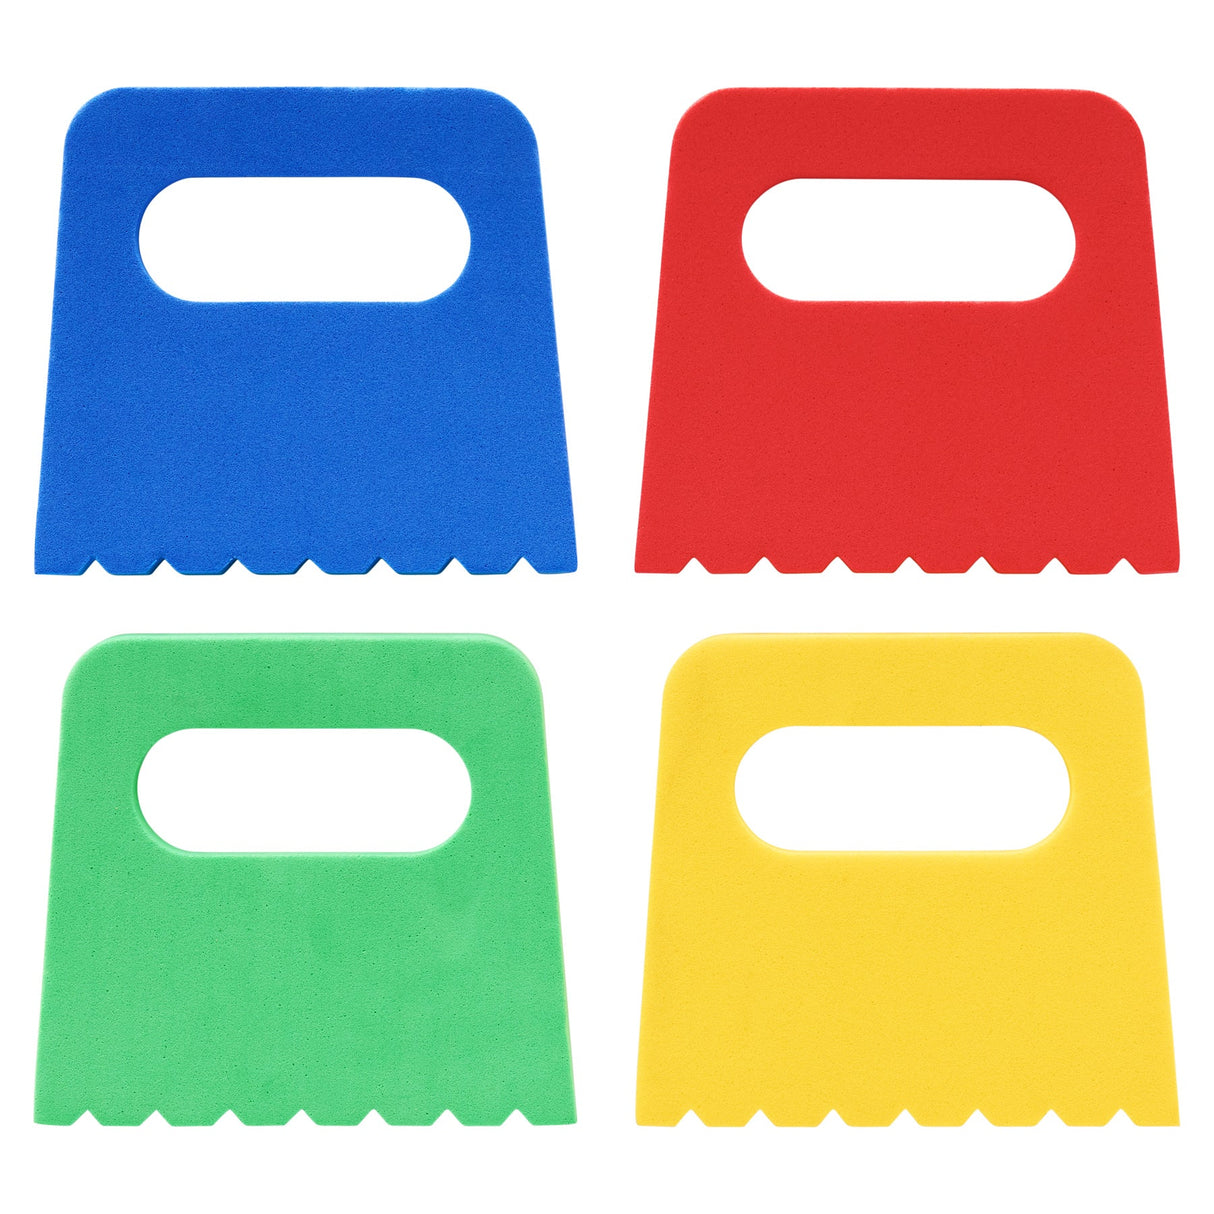 World of Colour Assorted Scrapes - Pack of 4 | Stationery Shop UK